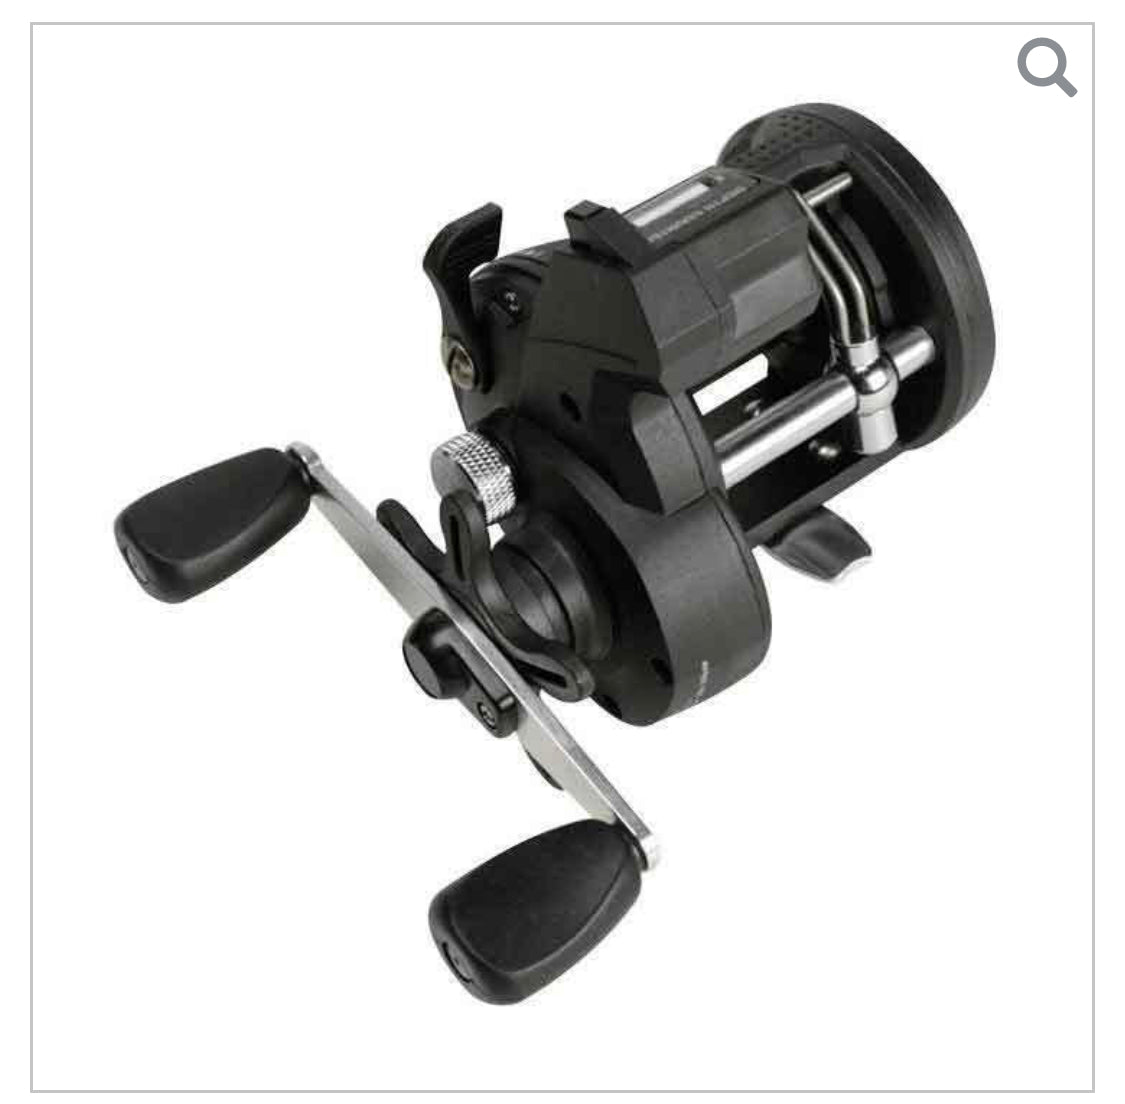 Shakespeare® ATS 20LCX Line Counter Trolling Reel – PTG Outdoors